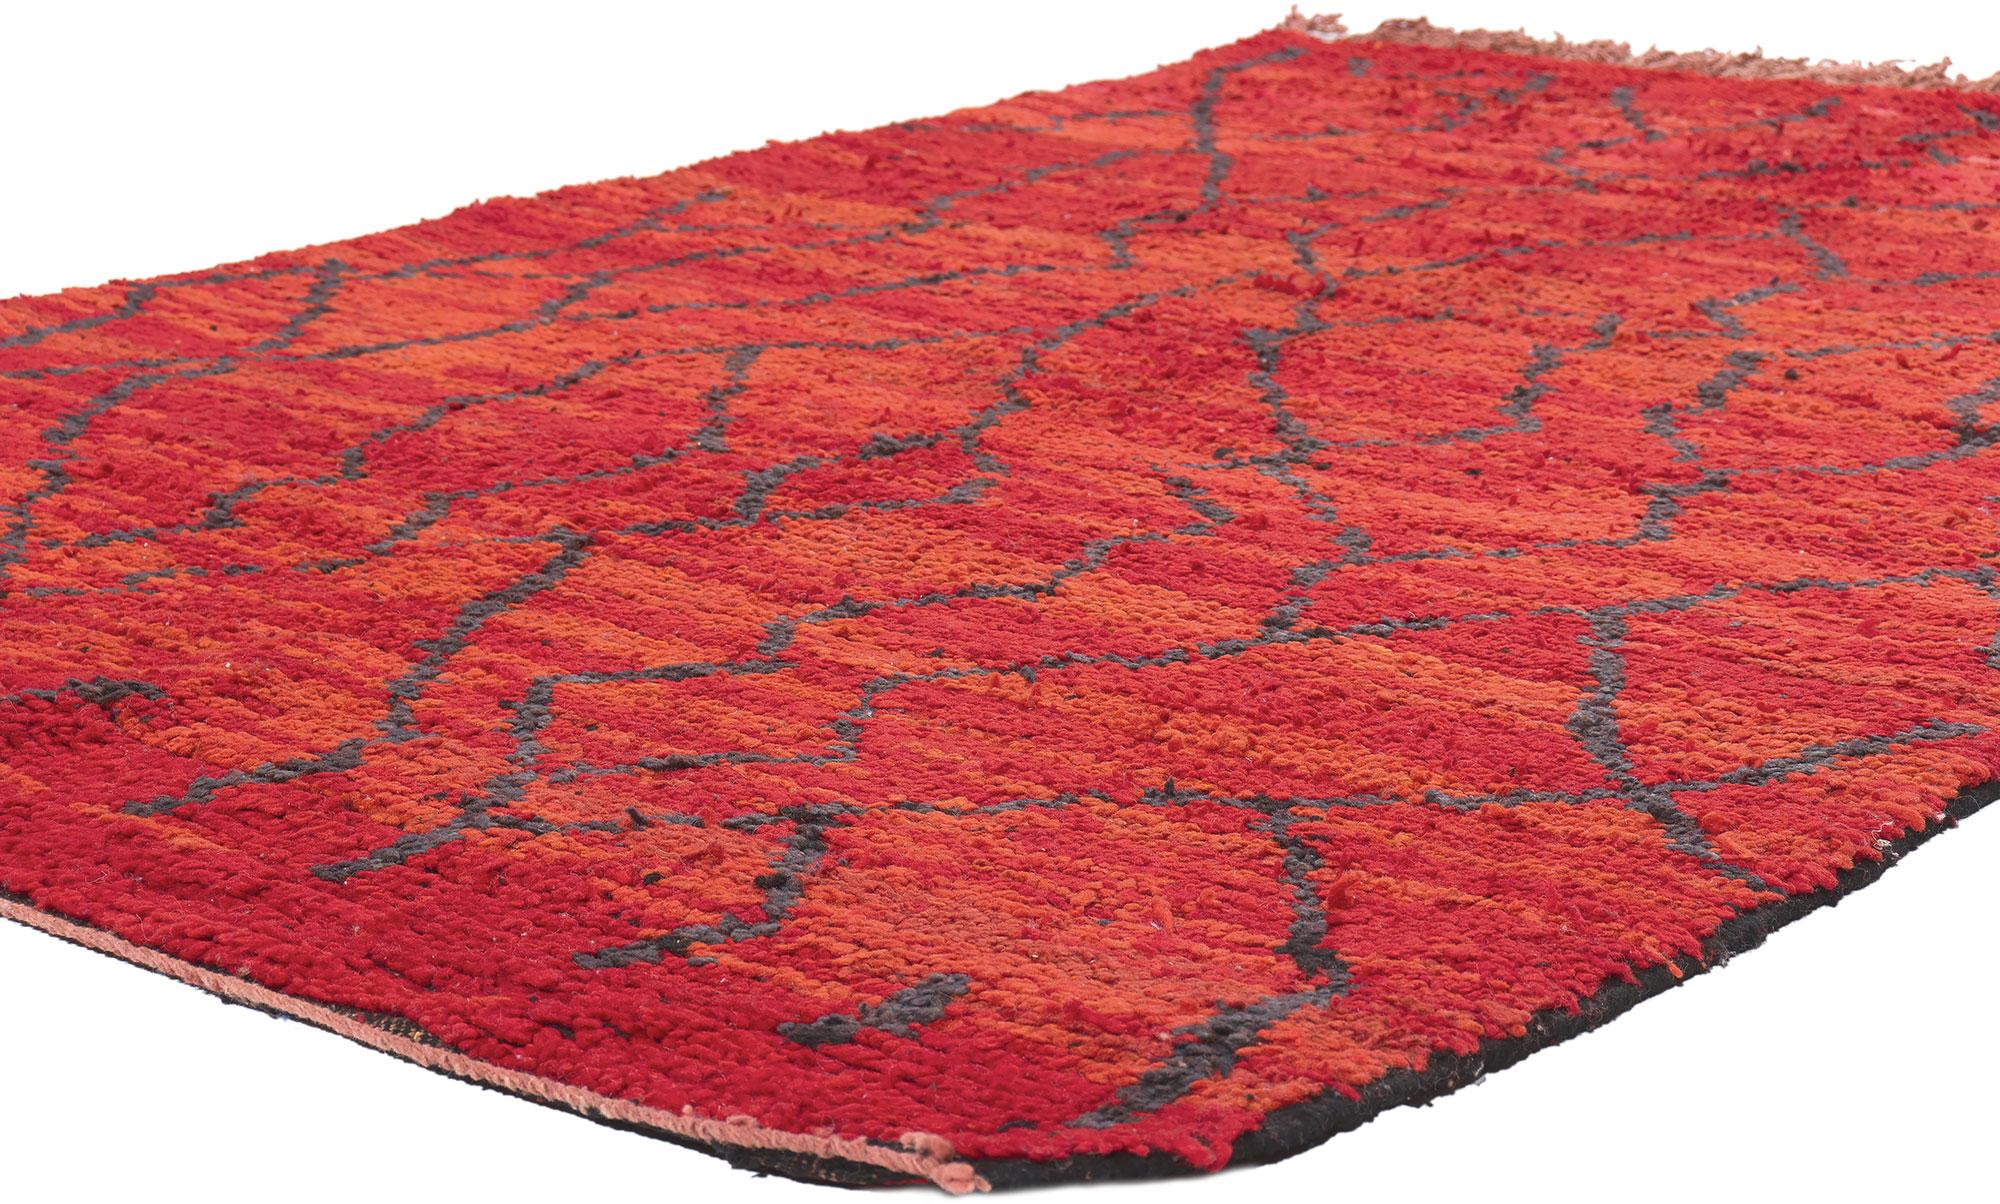 74822 Vintage Red Talsint Moroccan Rug, 05'00 x 08'03. Behold the captivating craftsmanship of this hand-knotted wool vintage red Talsint Moroccan rug, hailing from the Figuig region in northeast Morocco, also known as Aït Bou Ichaouen. Revealing a